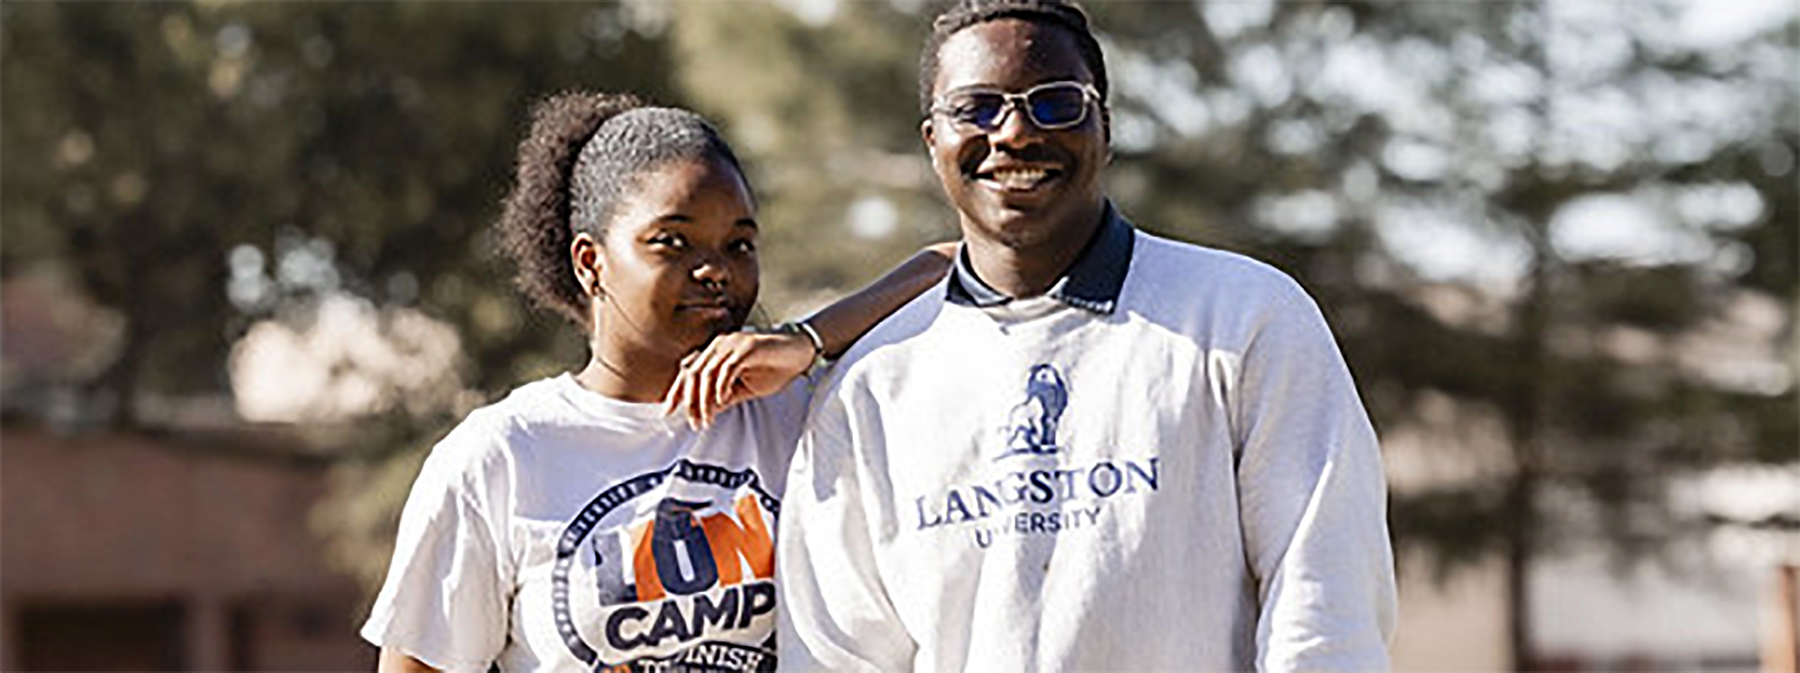 Female and male Langston University students with Lion Camp shirts